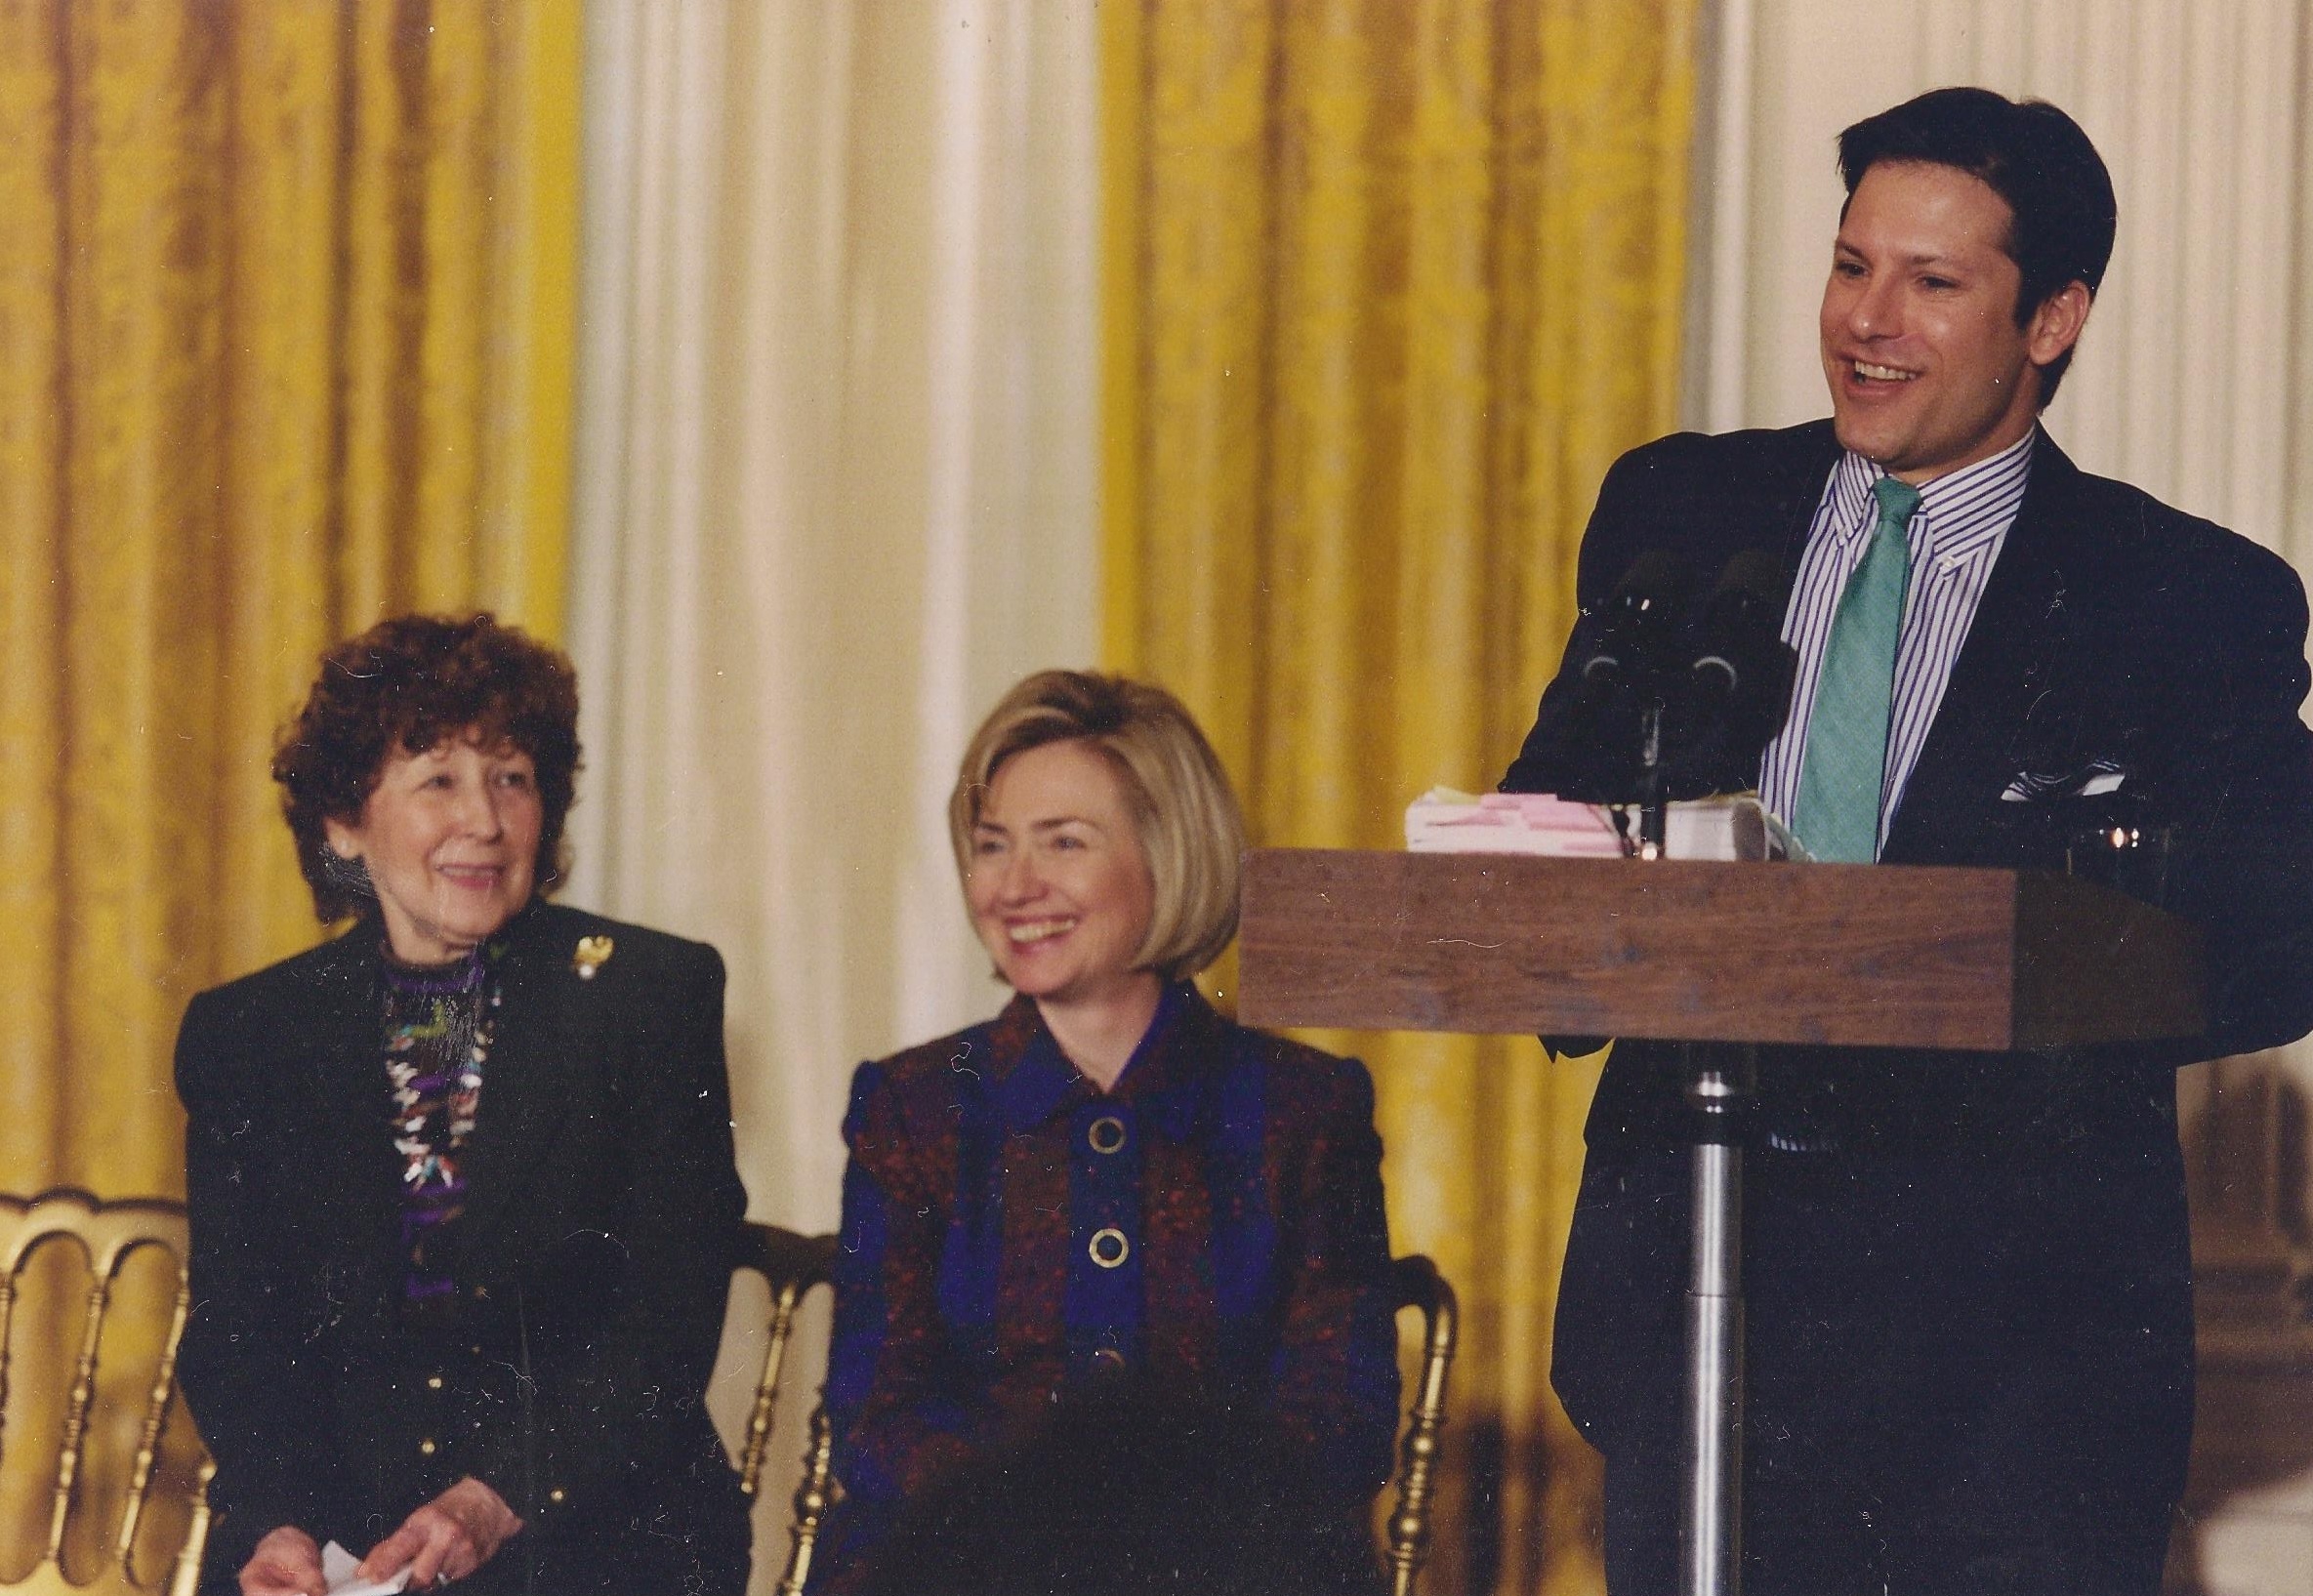 Hillary Clinton with Mary Regula, founder of the National First Ladies' Library at the East Room launch of the NFLL website, its historian Carl Anthony at the lectern. (WJCPL)